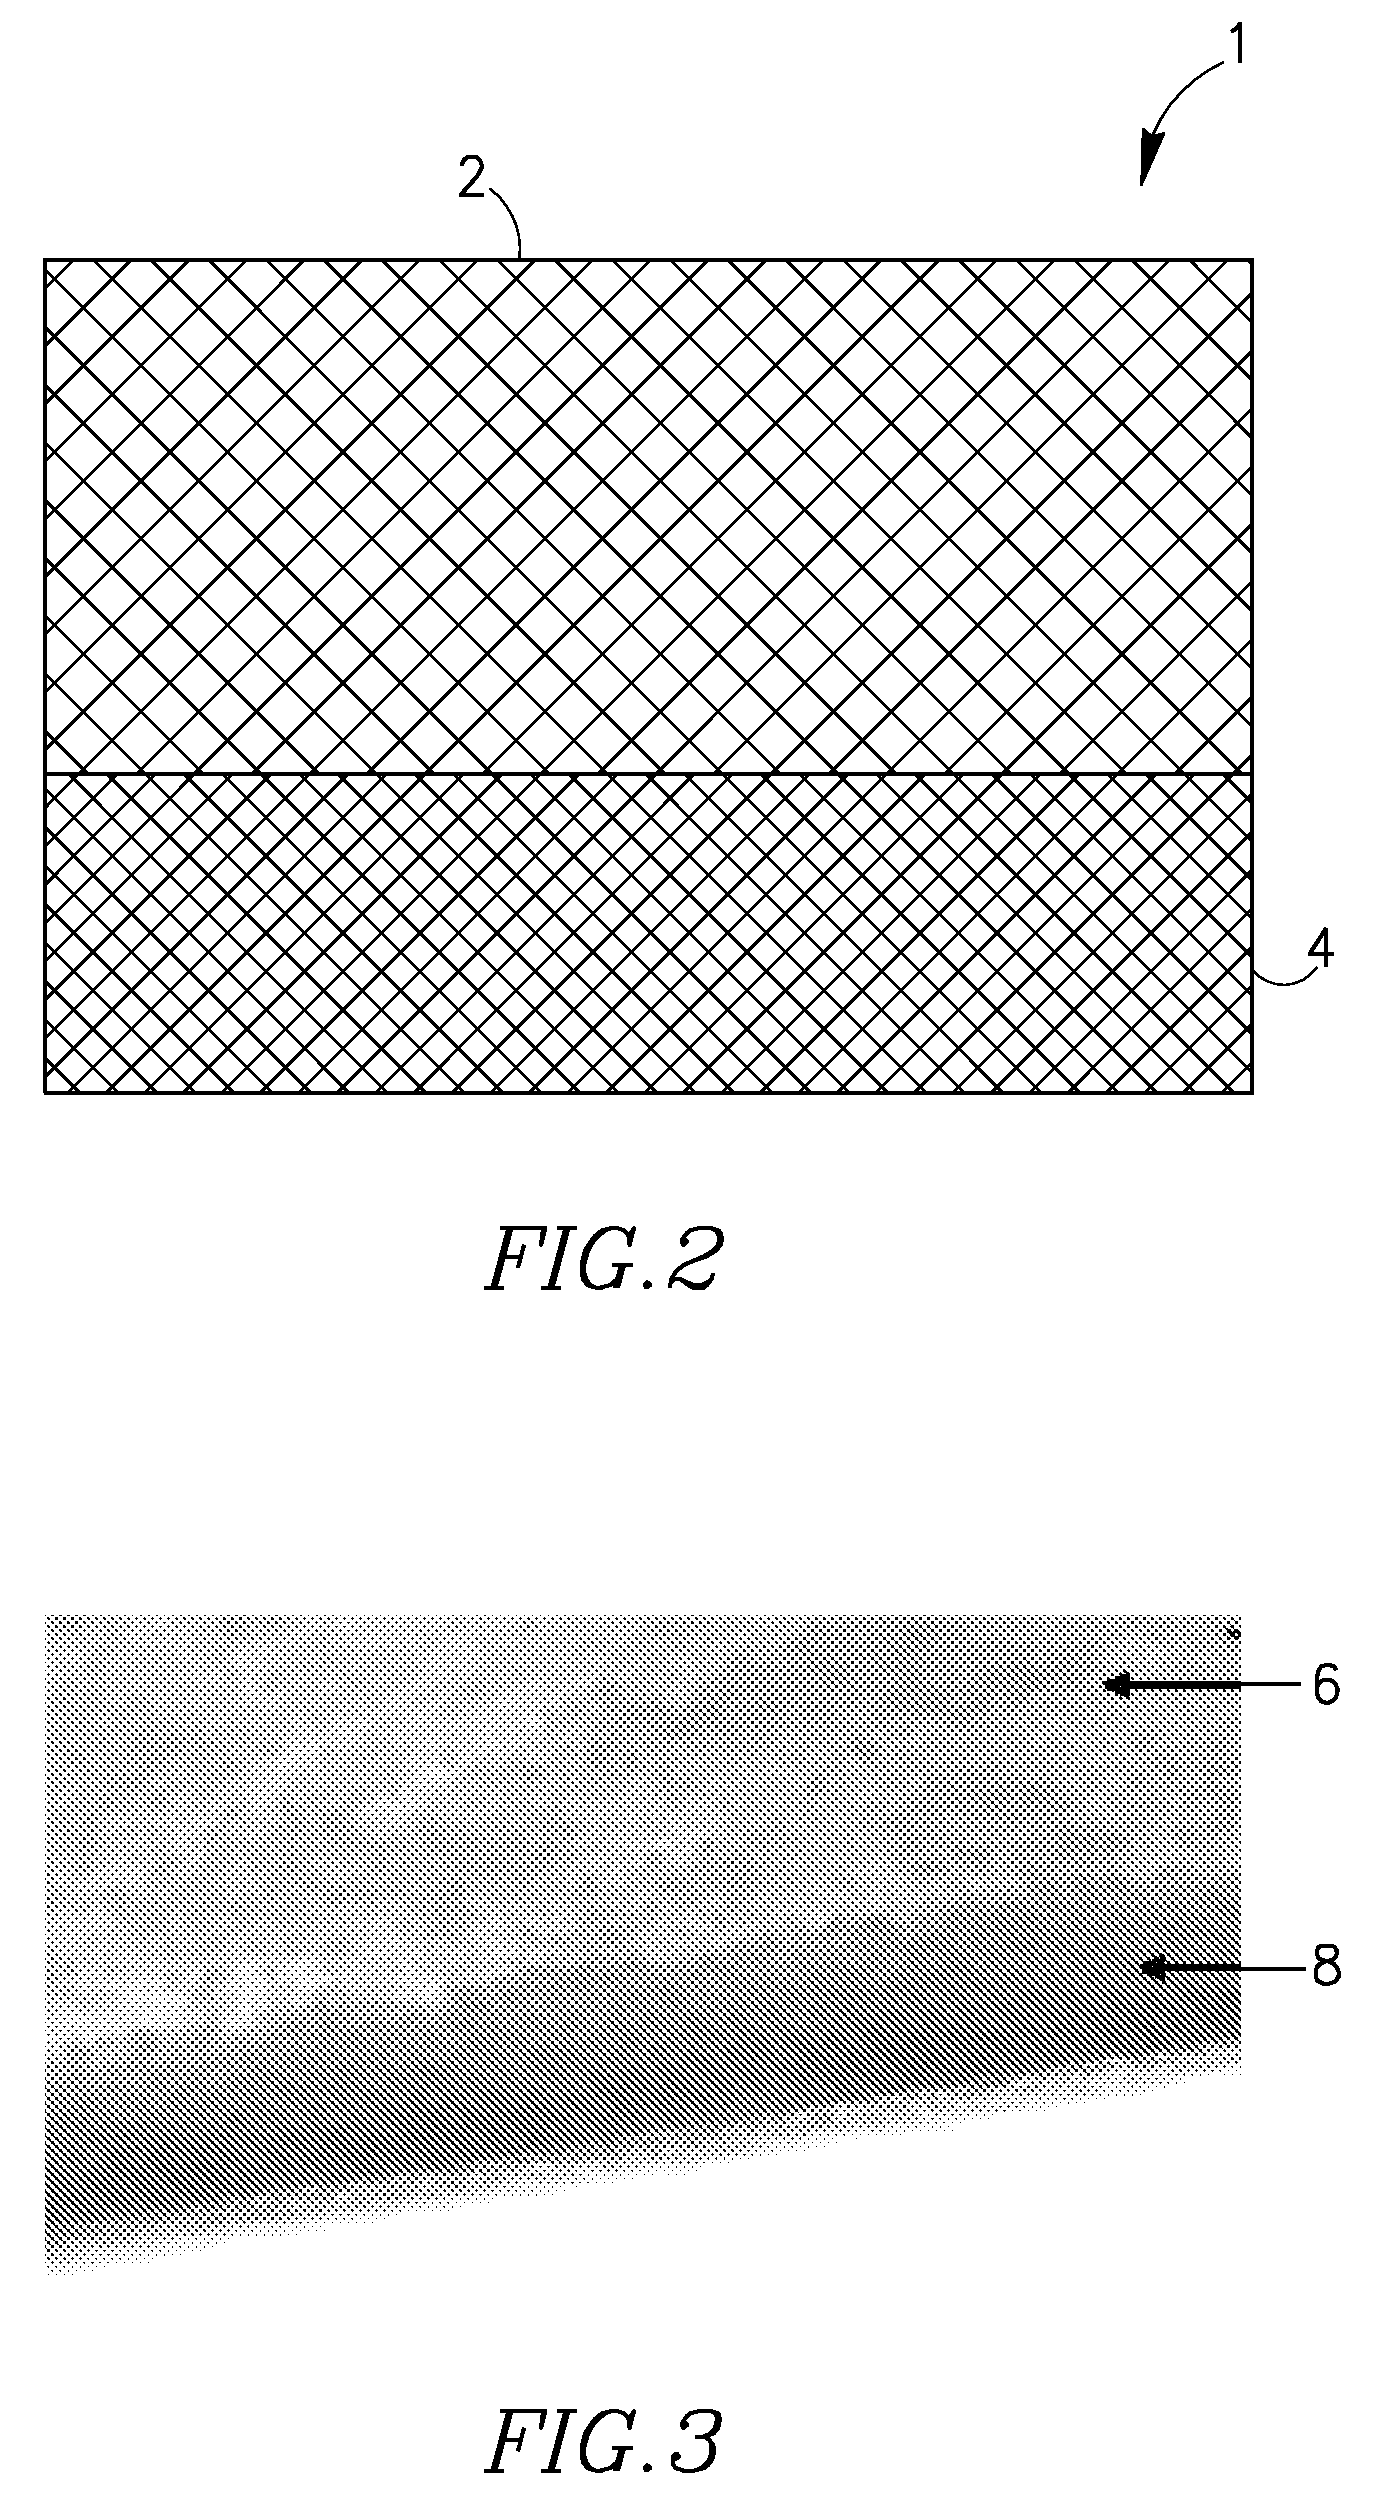 Composite implants for promoting bone regeneration and augmentation and methods for their preparation and use